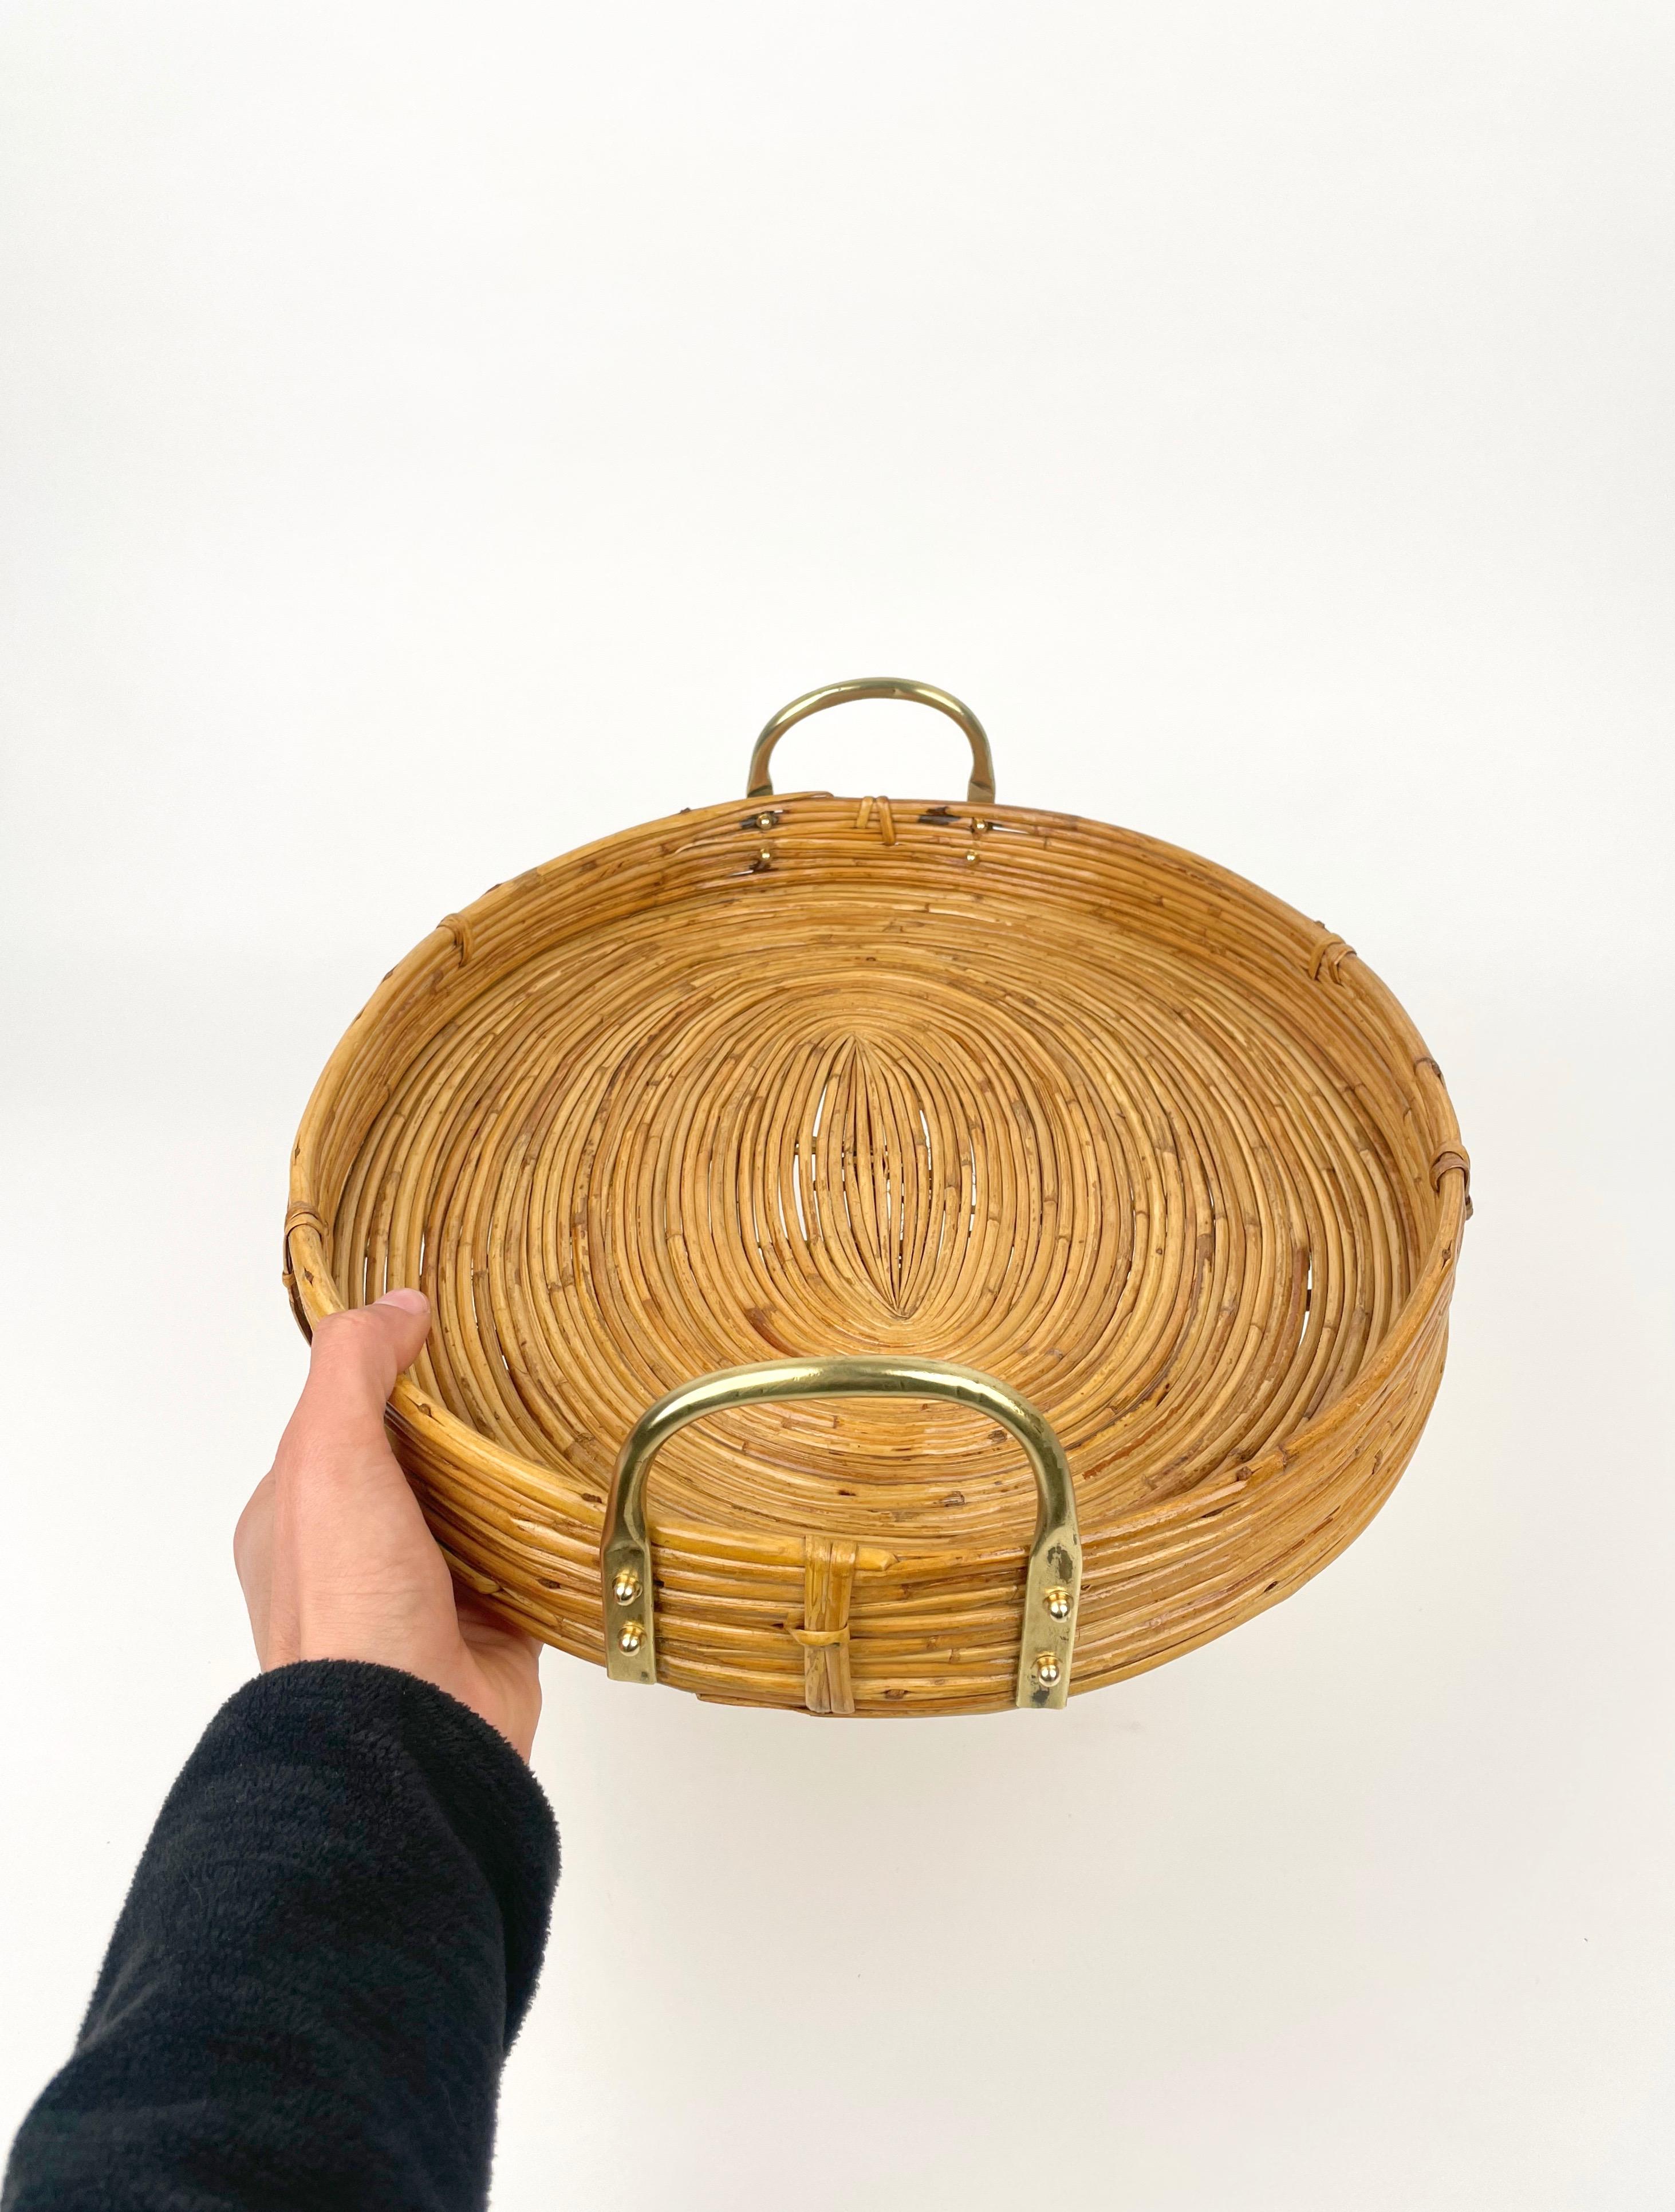 Oval Serving Tray Bamboo, Rattan & Brass, Italy 1970s For Sale 3